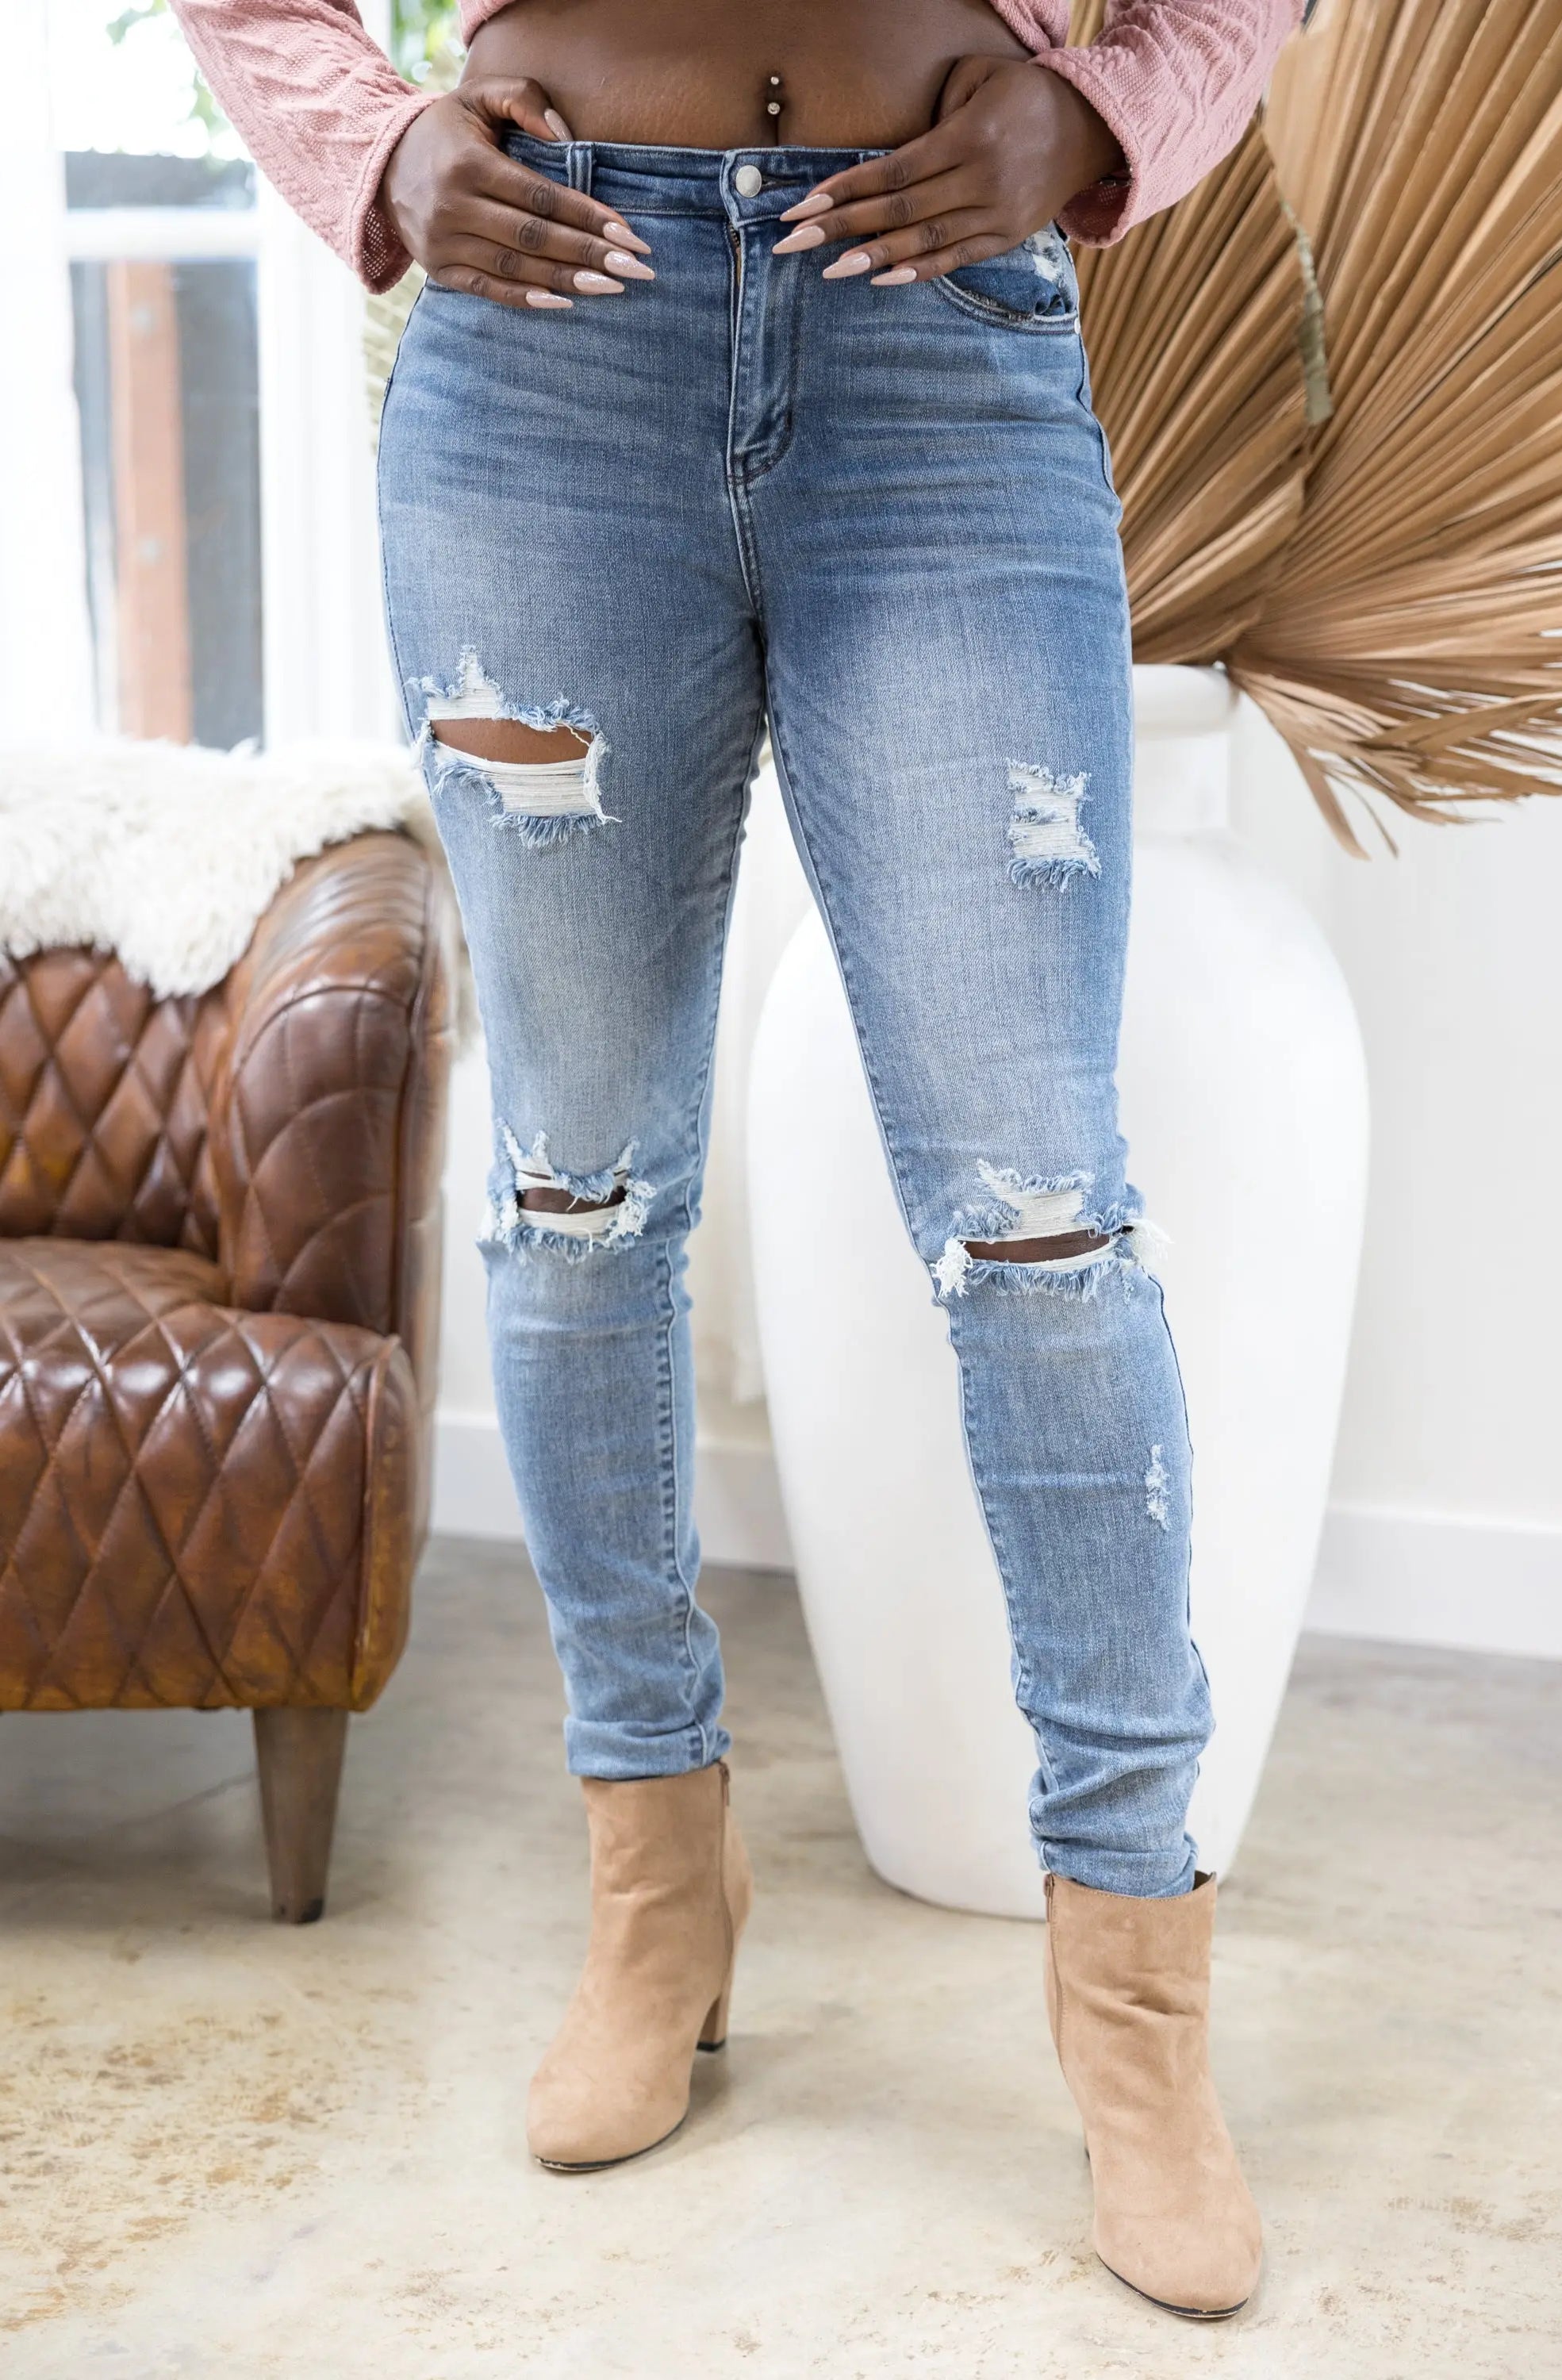 Reach For The Stars - Judy Blue TALL Skinnies JB Boutique Simplified